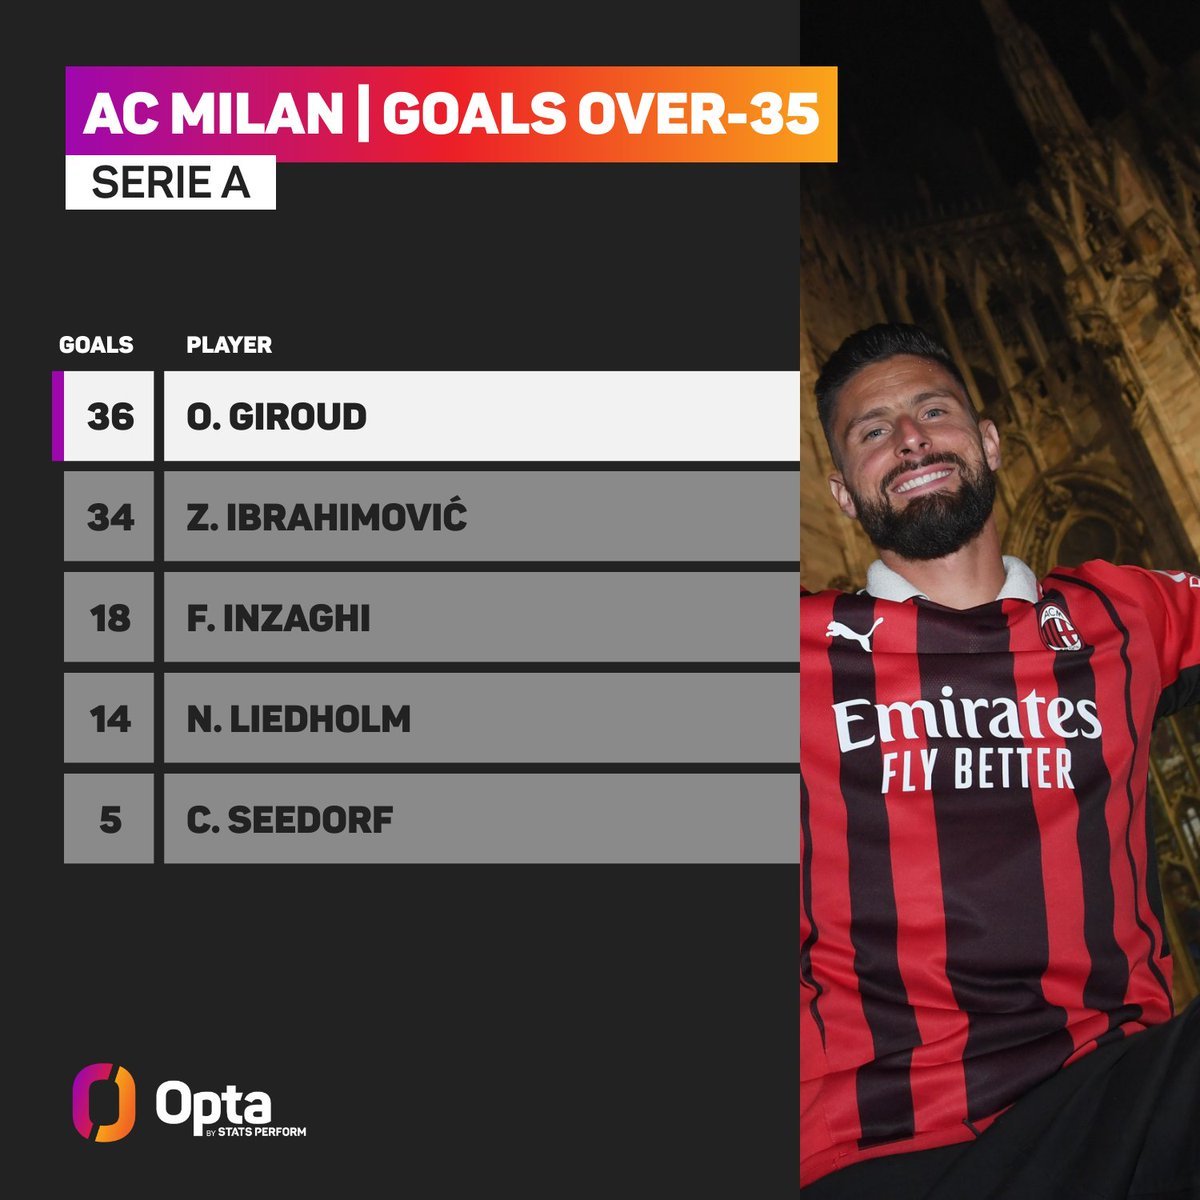 Goals from #ACMilan players in Serie A after turning 35: 1. @_OlivierGiroud_ - 36 2. Zlatan Ibrahimović - 34 3. Filippo Inzaghi - 18 4. Nils Liedholm - 14 5. Clarence Seedorf - 5 [via @OptaPaolo]